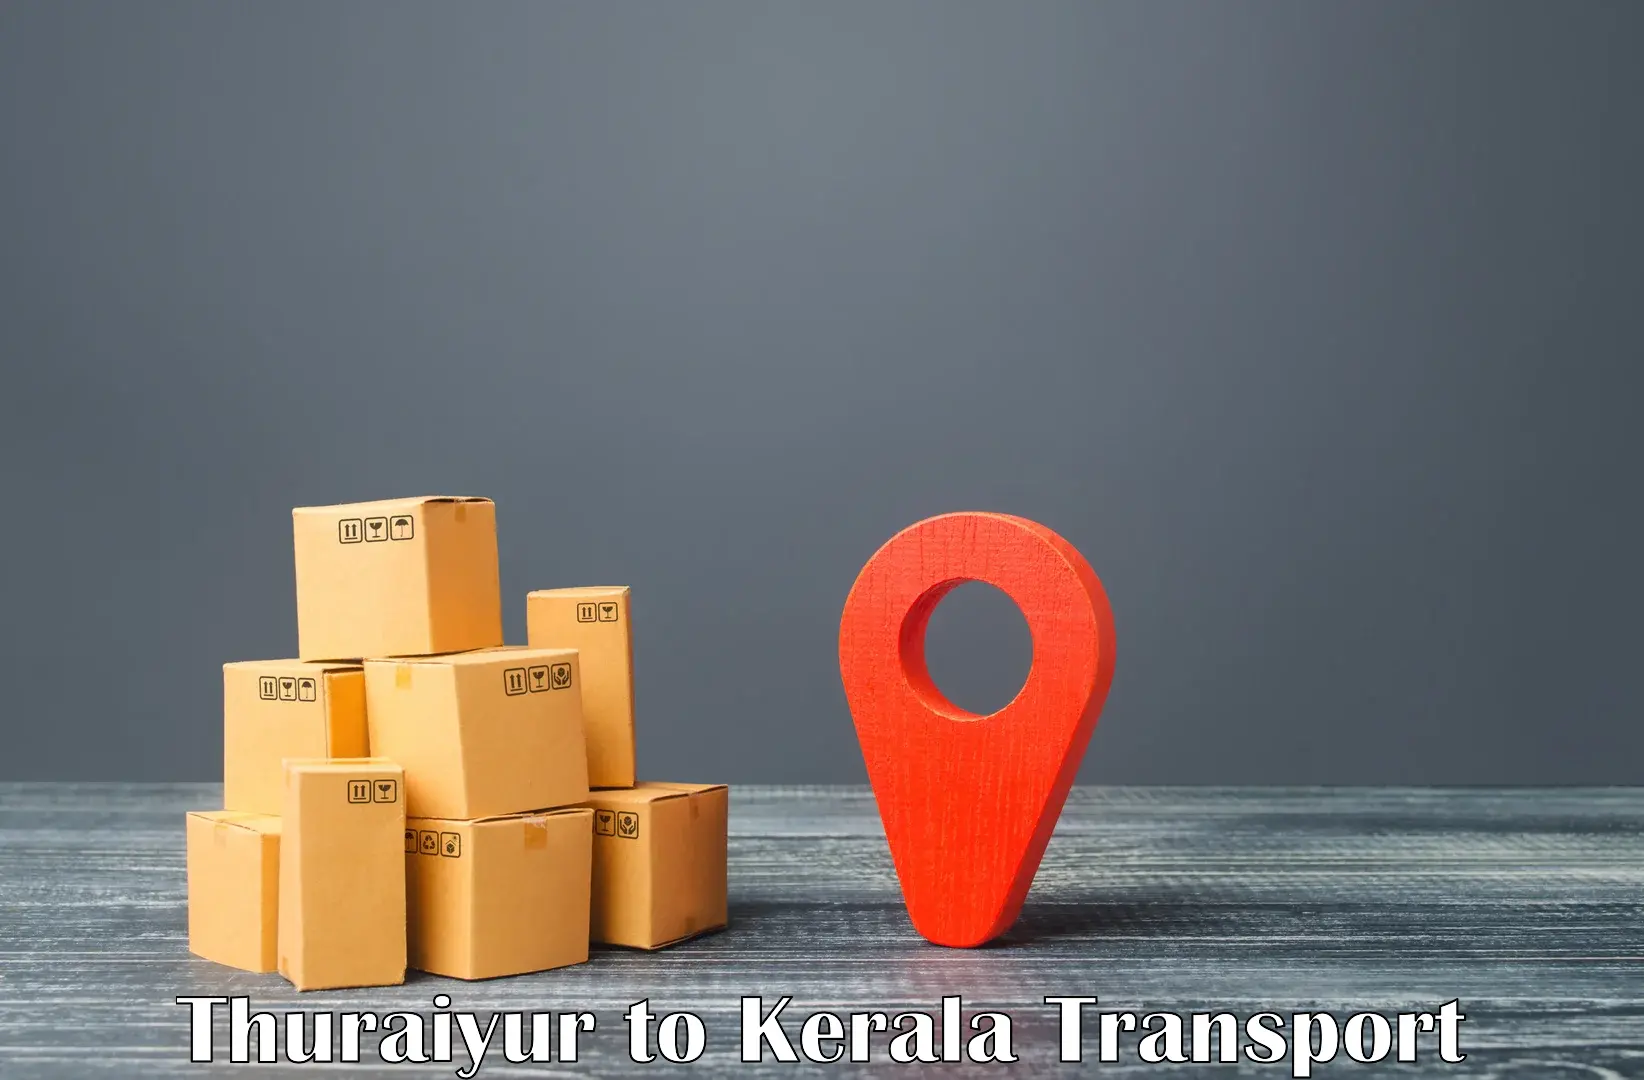 Express transport services Thuraiyur to Mananthavady